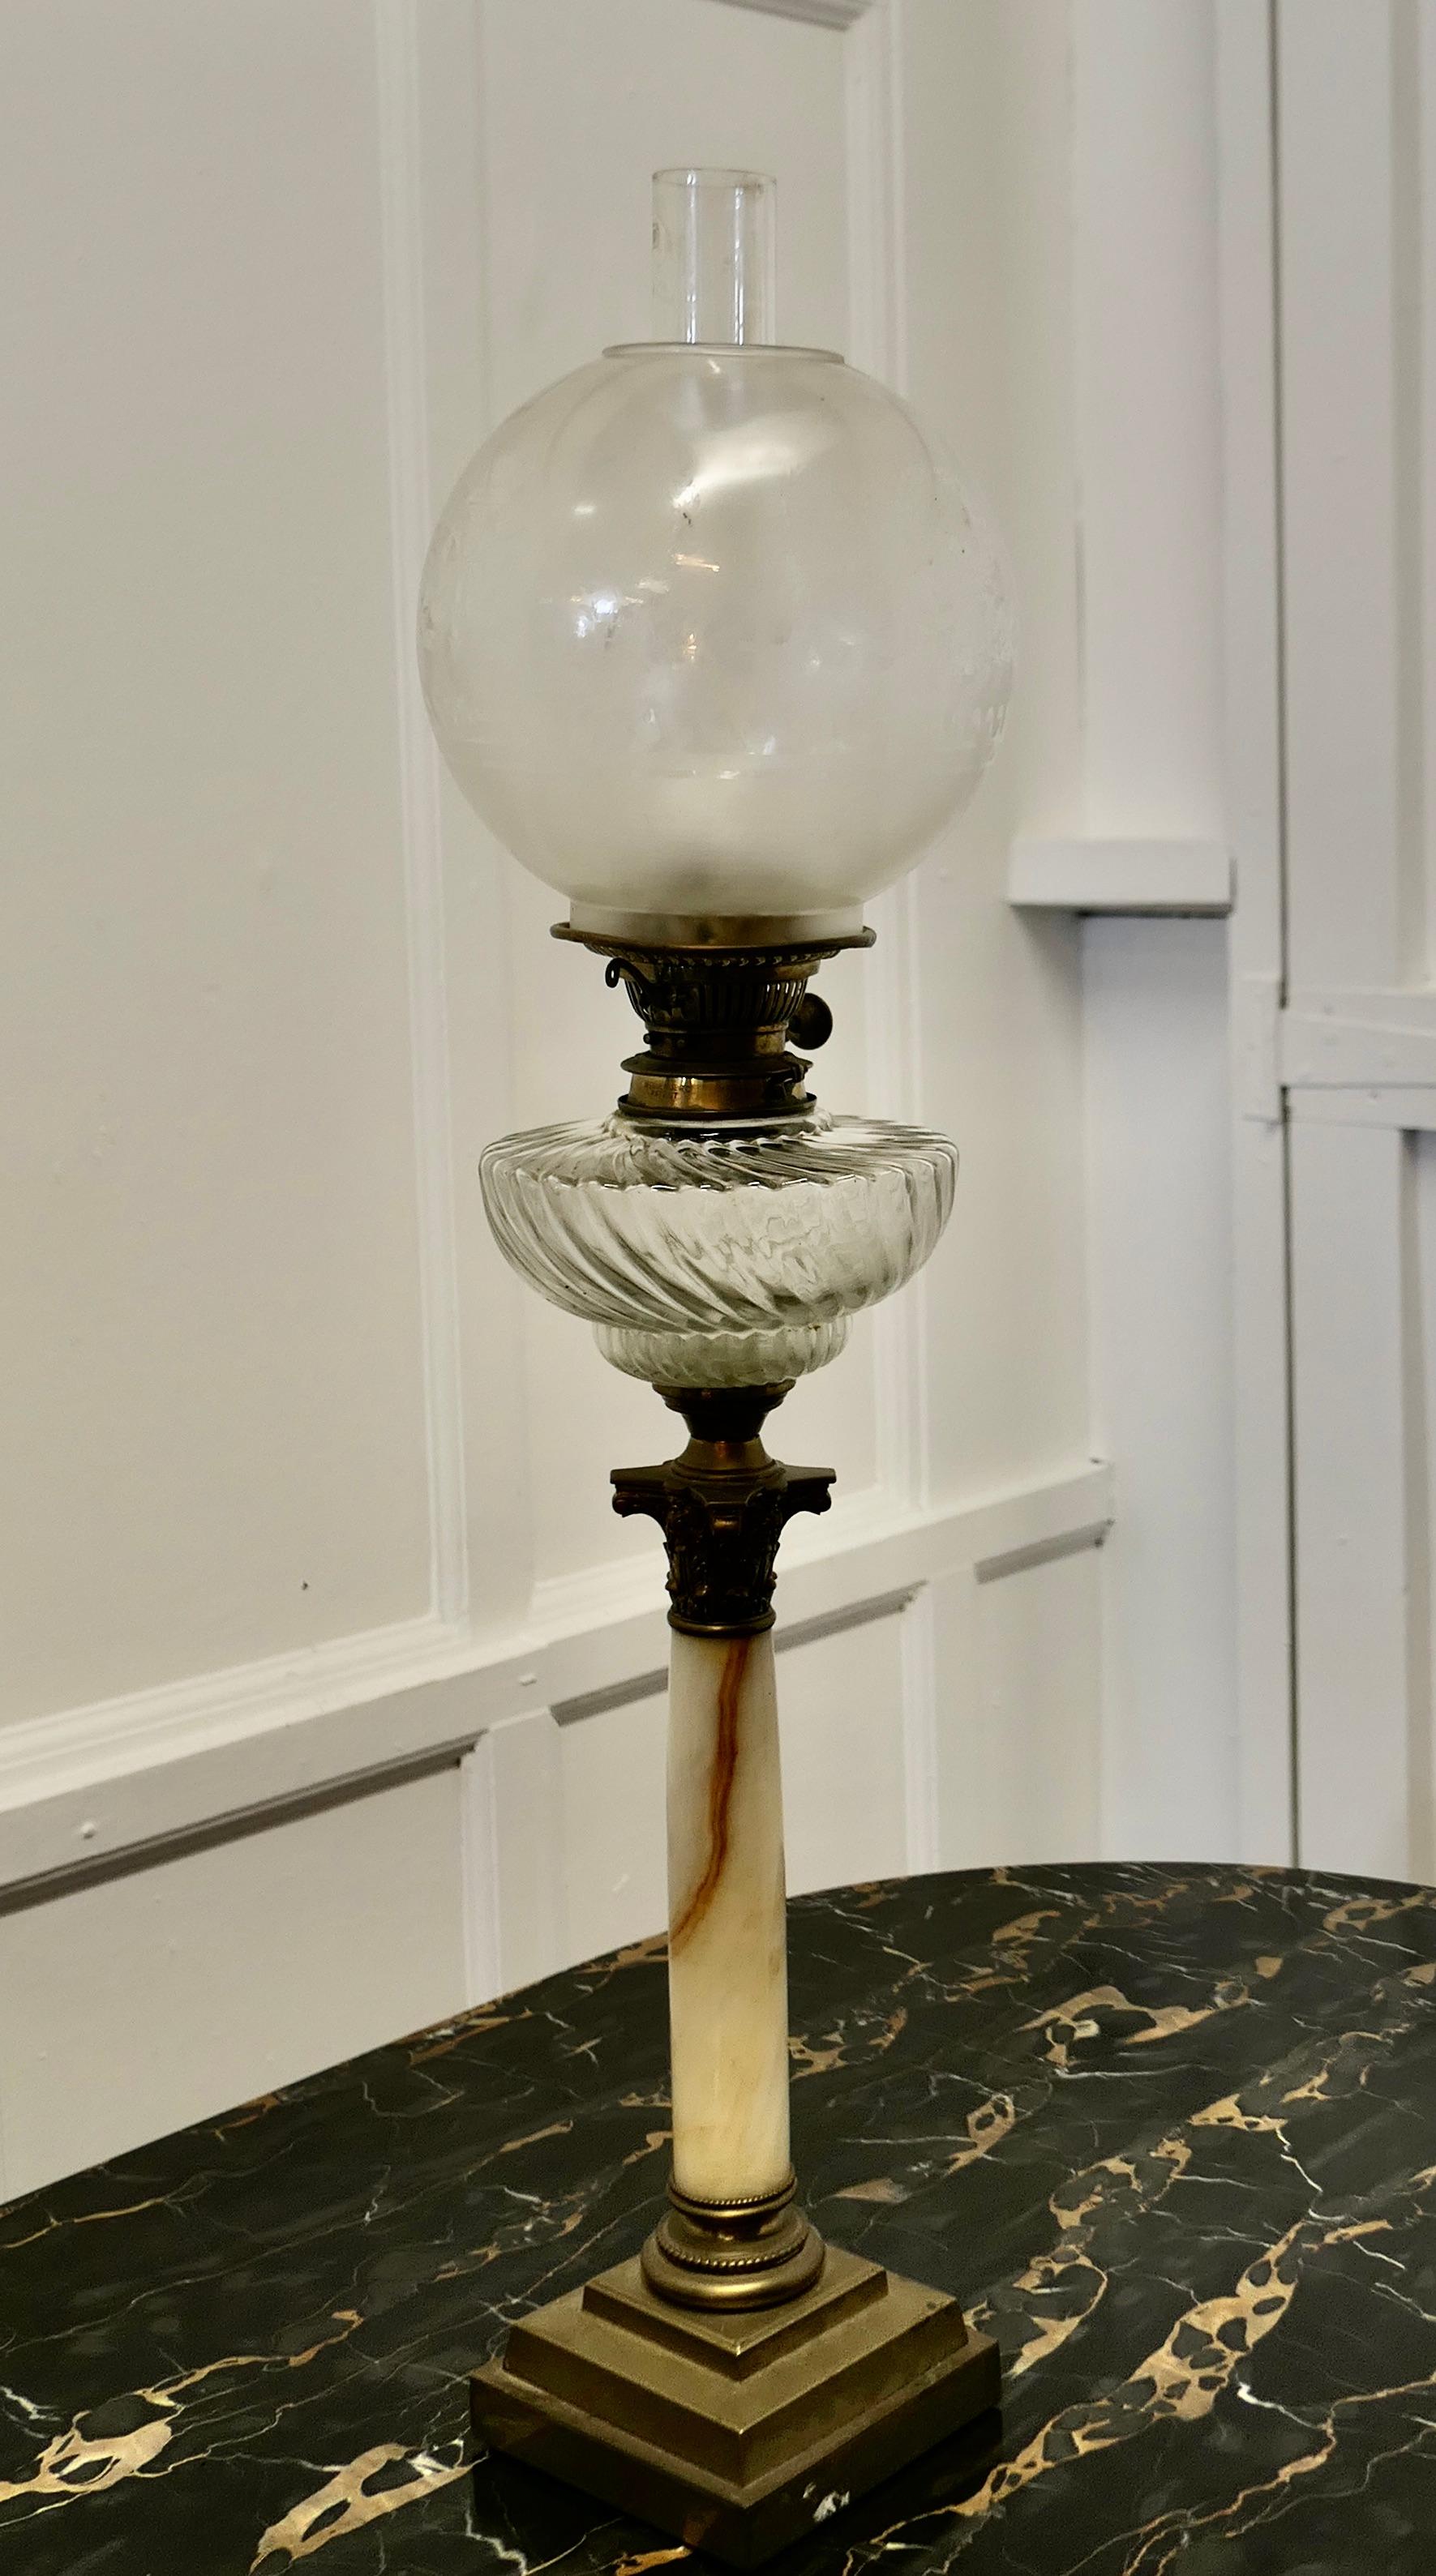 Glass Oil Lamp on Marble Column with a Stepped Brass Base

A pretty Glass lamp set on a marble  and  brass base, the lamp is a great looking piece, it has a glass chimney and a burner but I cannot guarantee if it is in working condition 

The lamp 